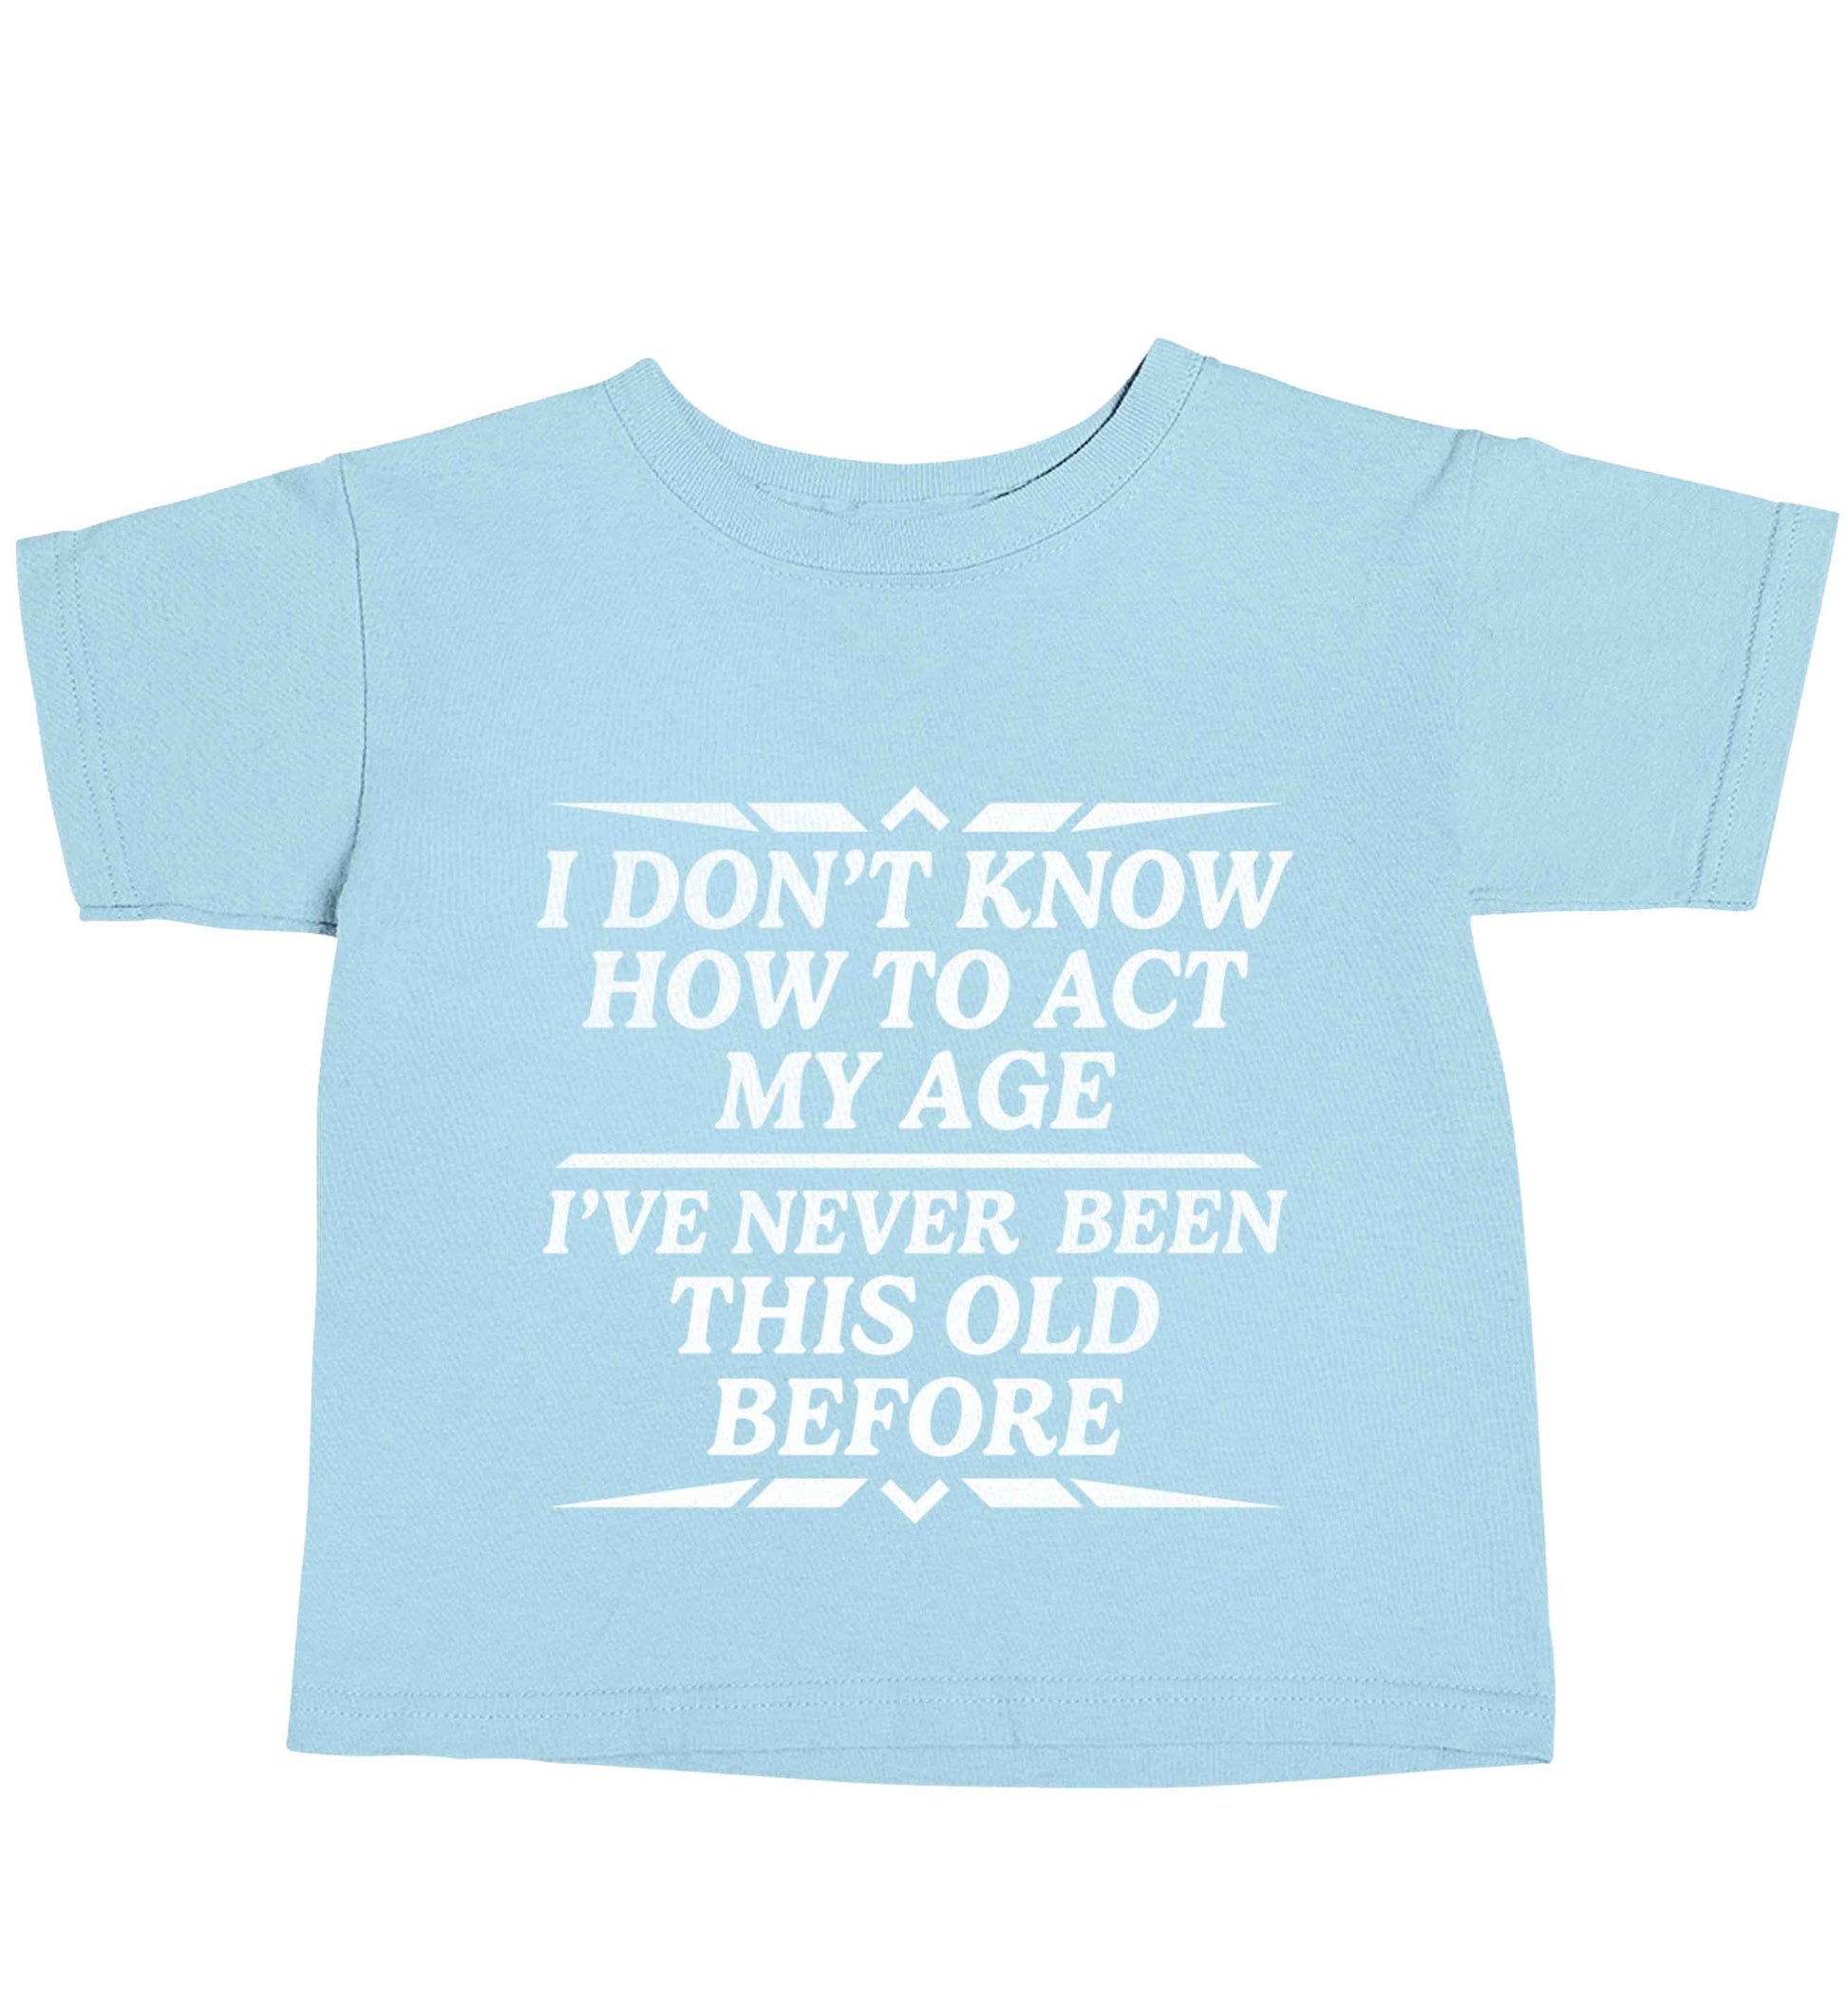 I don't know how to act my age I've never been this old before light blue baby toddler Tshirt 2 Years